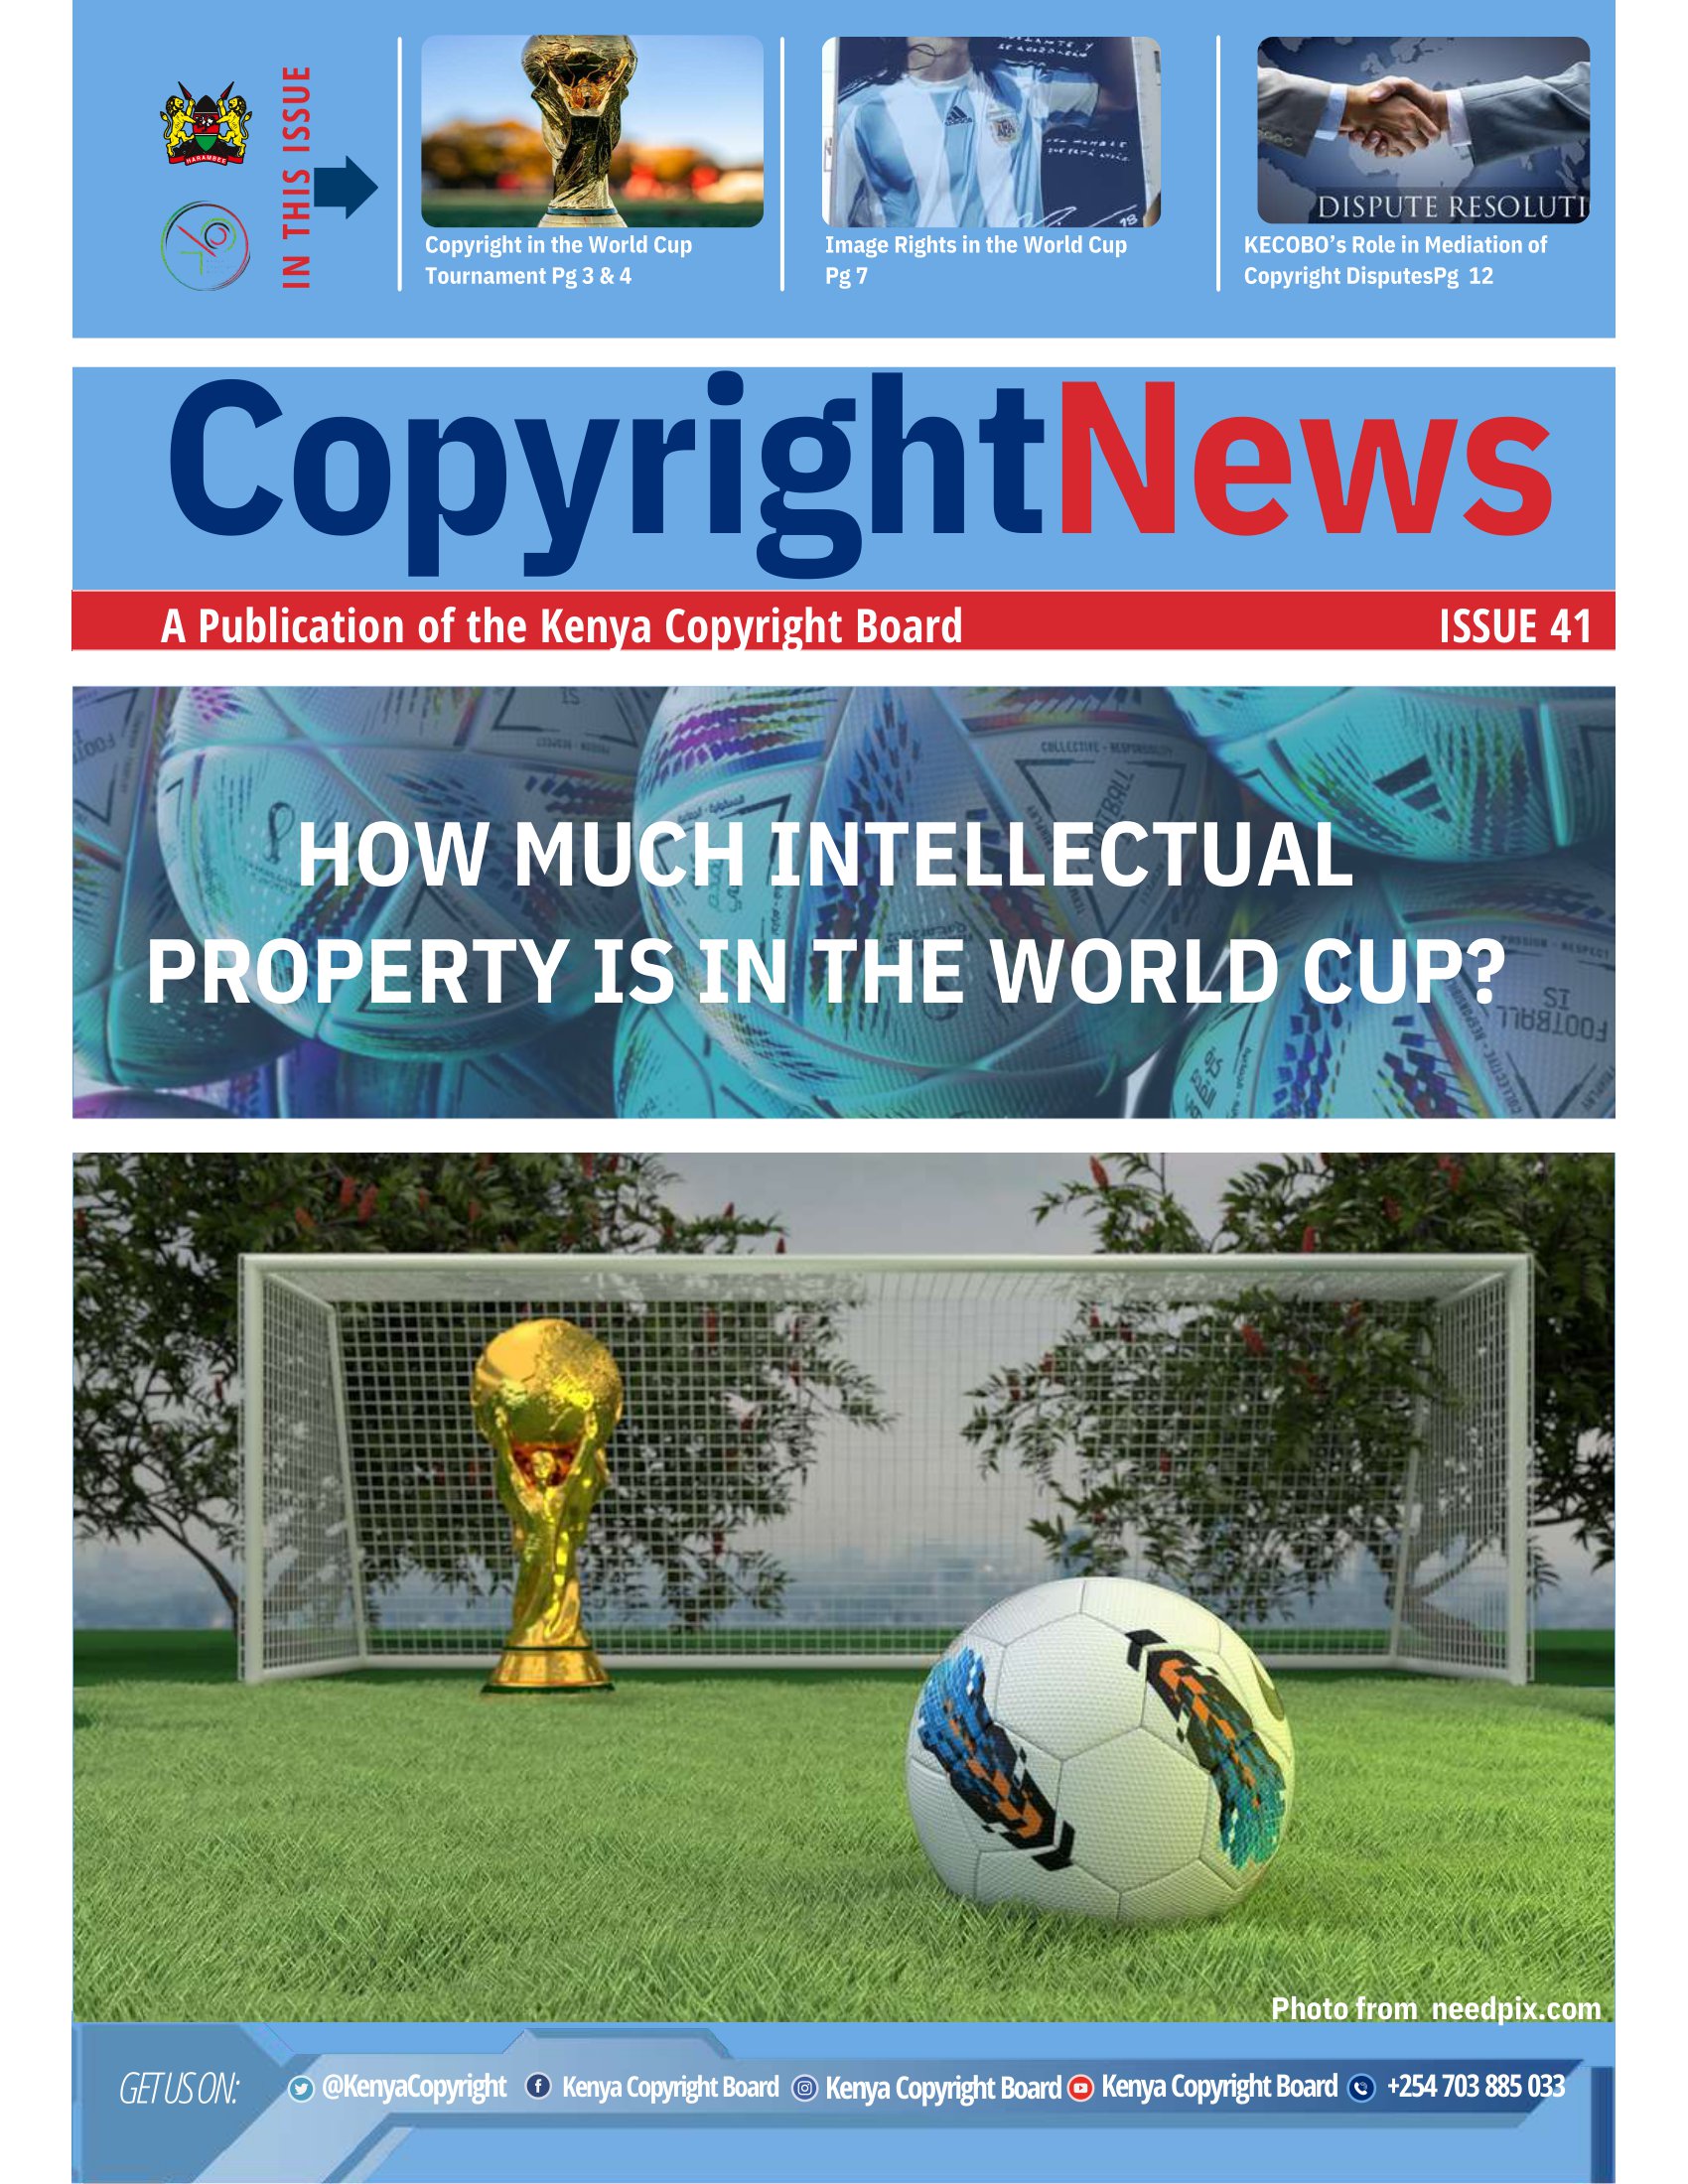 HOW MUCH INTELLECTUAL PROPERTY IS IN THE WORLD CUP?